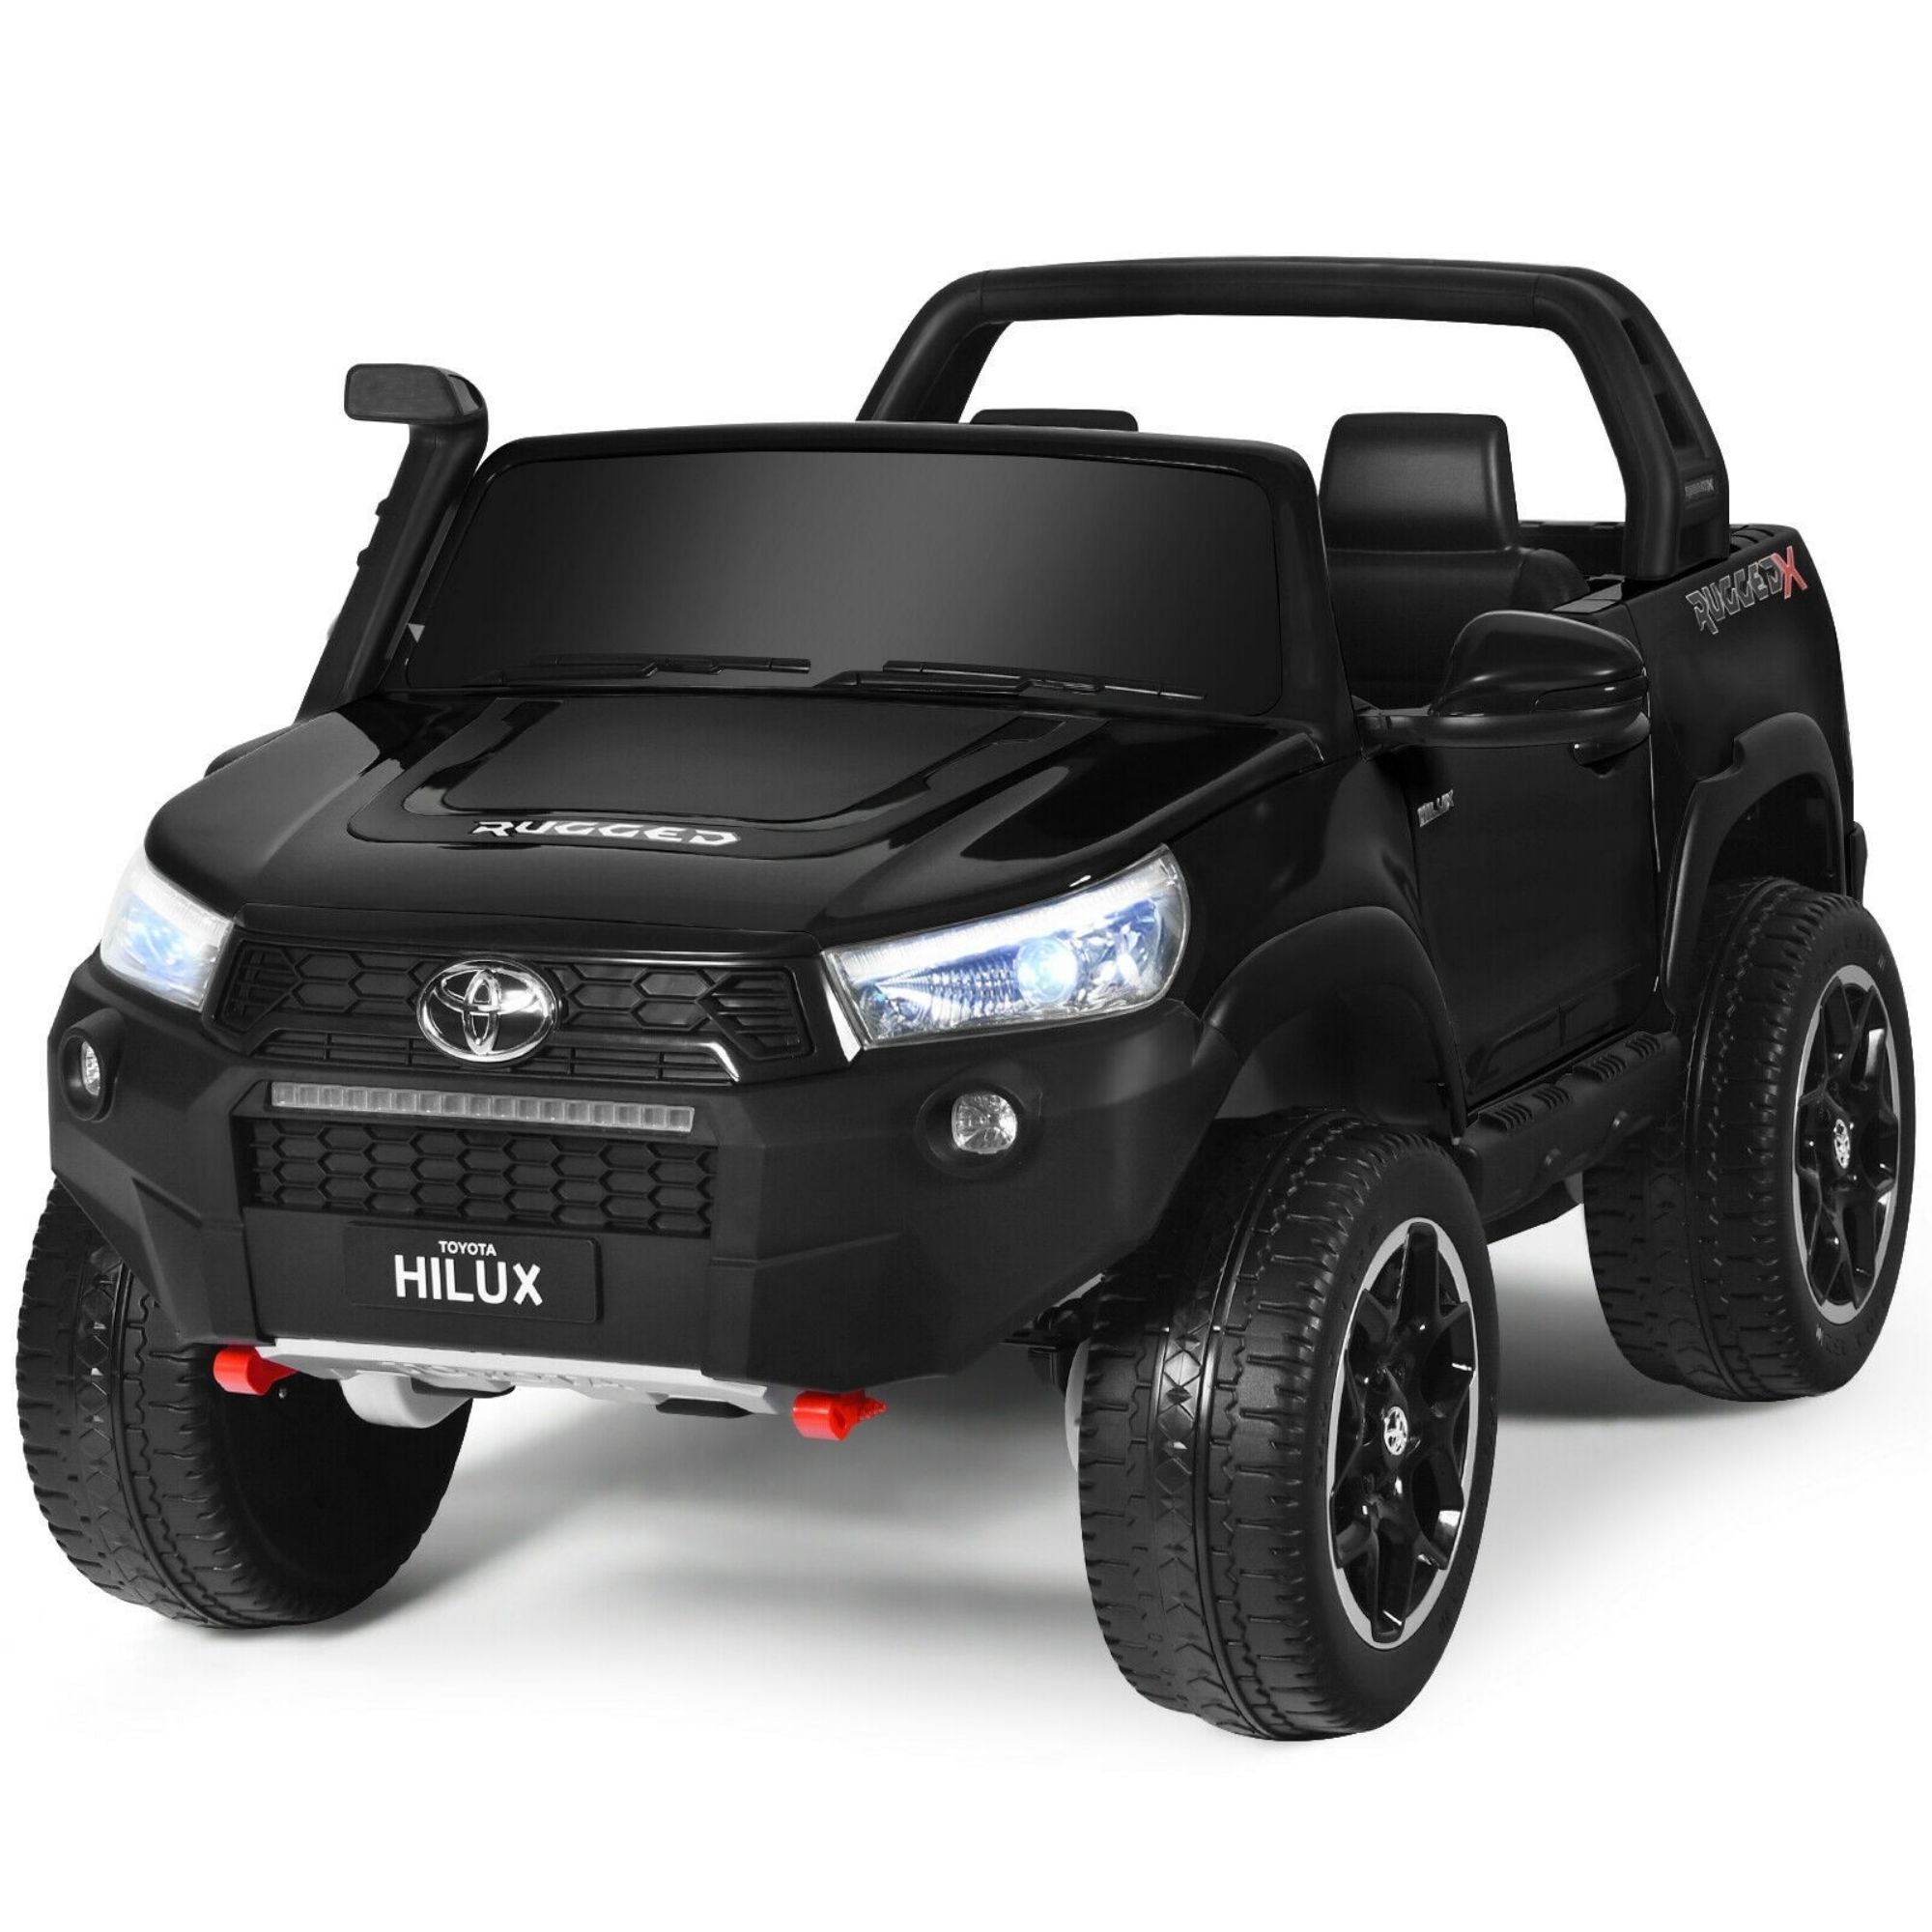 24V Licensed Toyota Hilux Ride On Truck Car 2-Seater 4WD with Remote